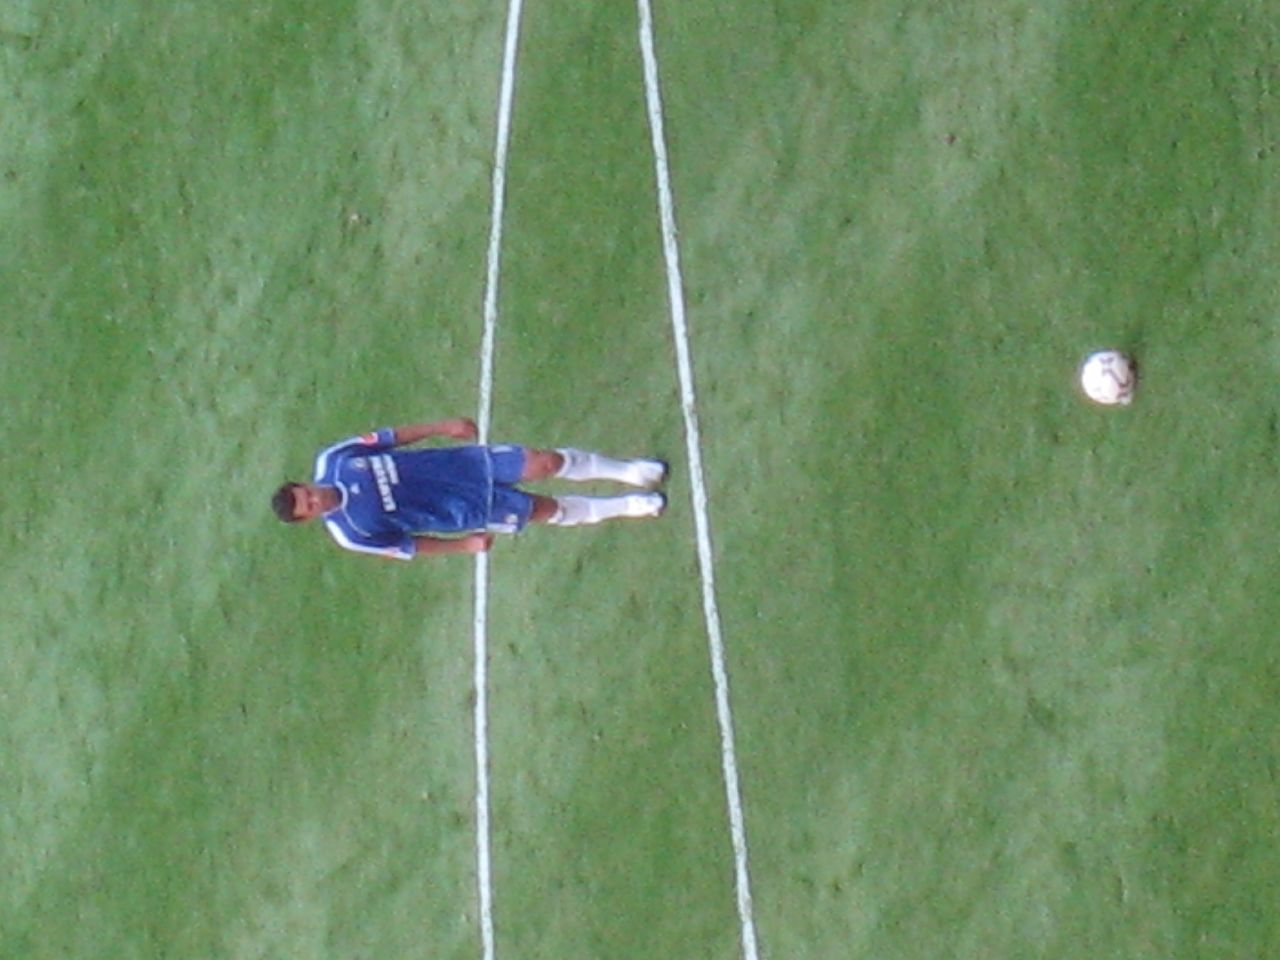 soccer player wearing blue uniform and white socks and looking at ball